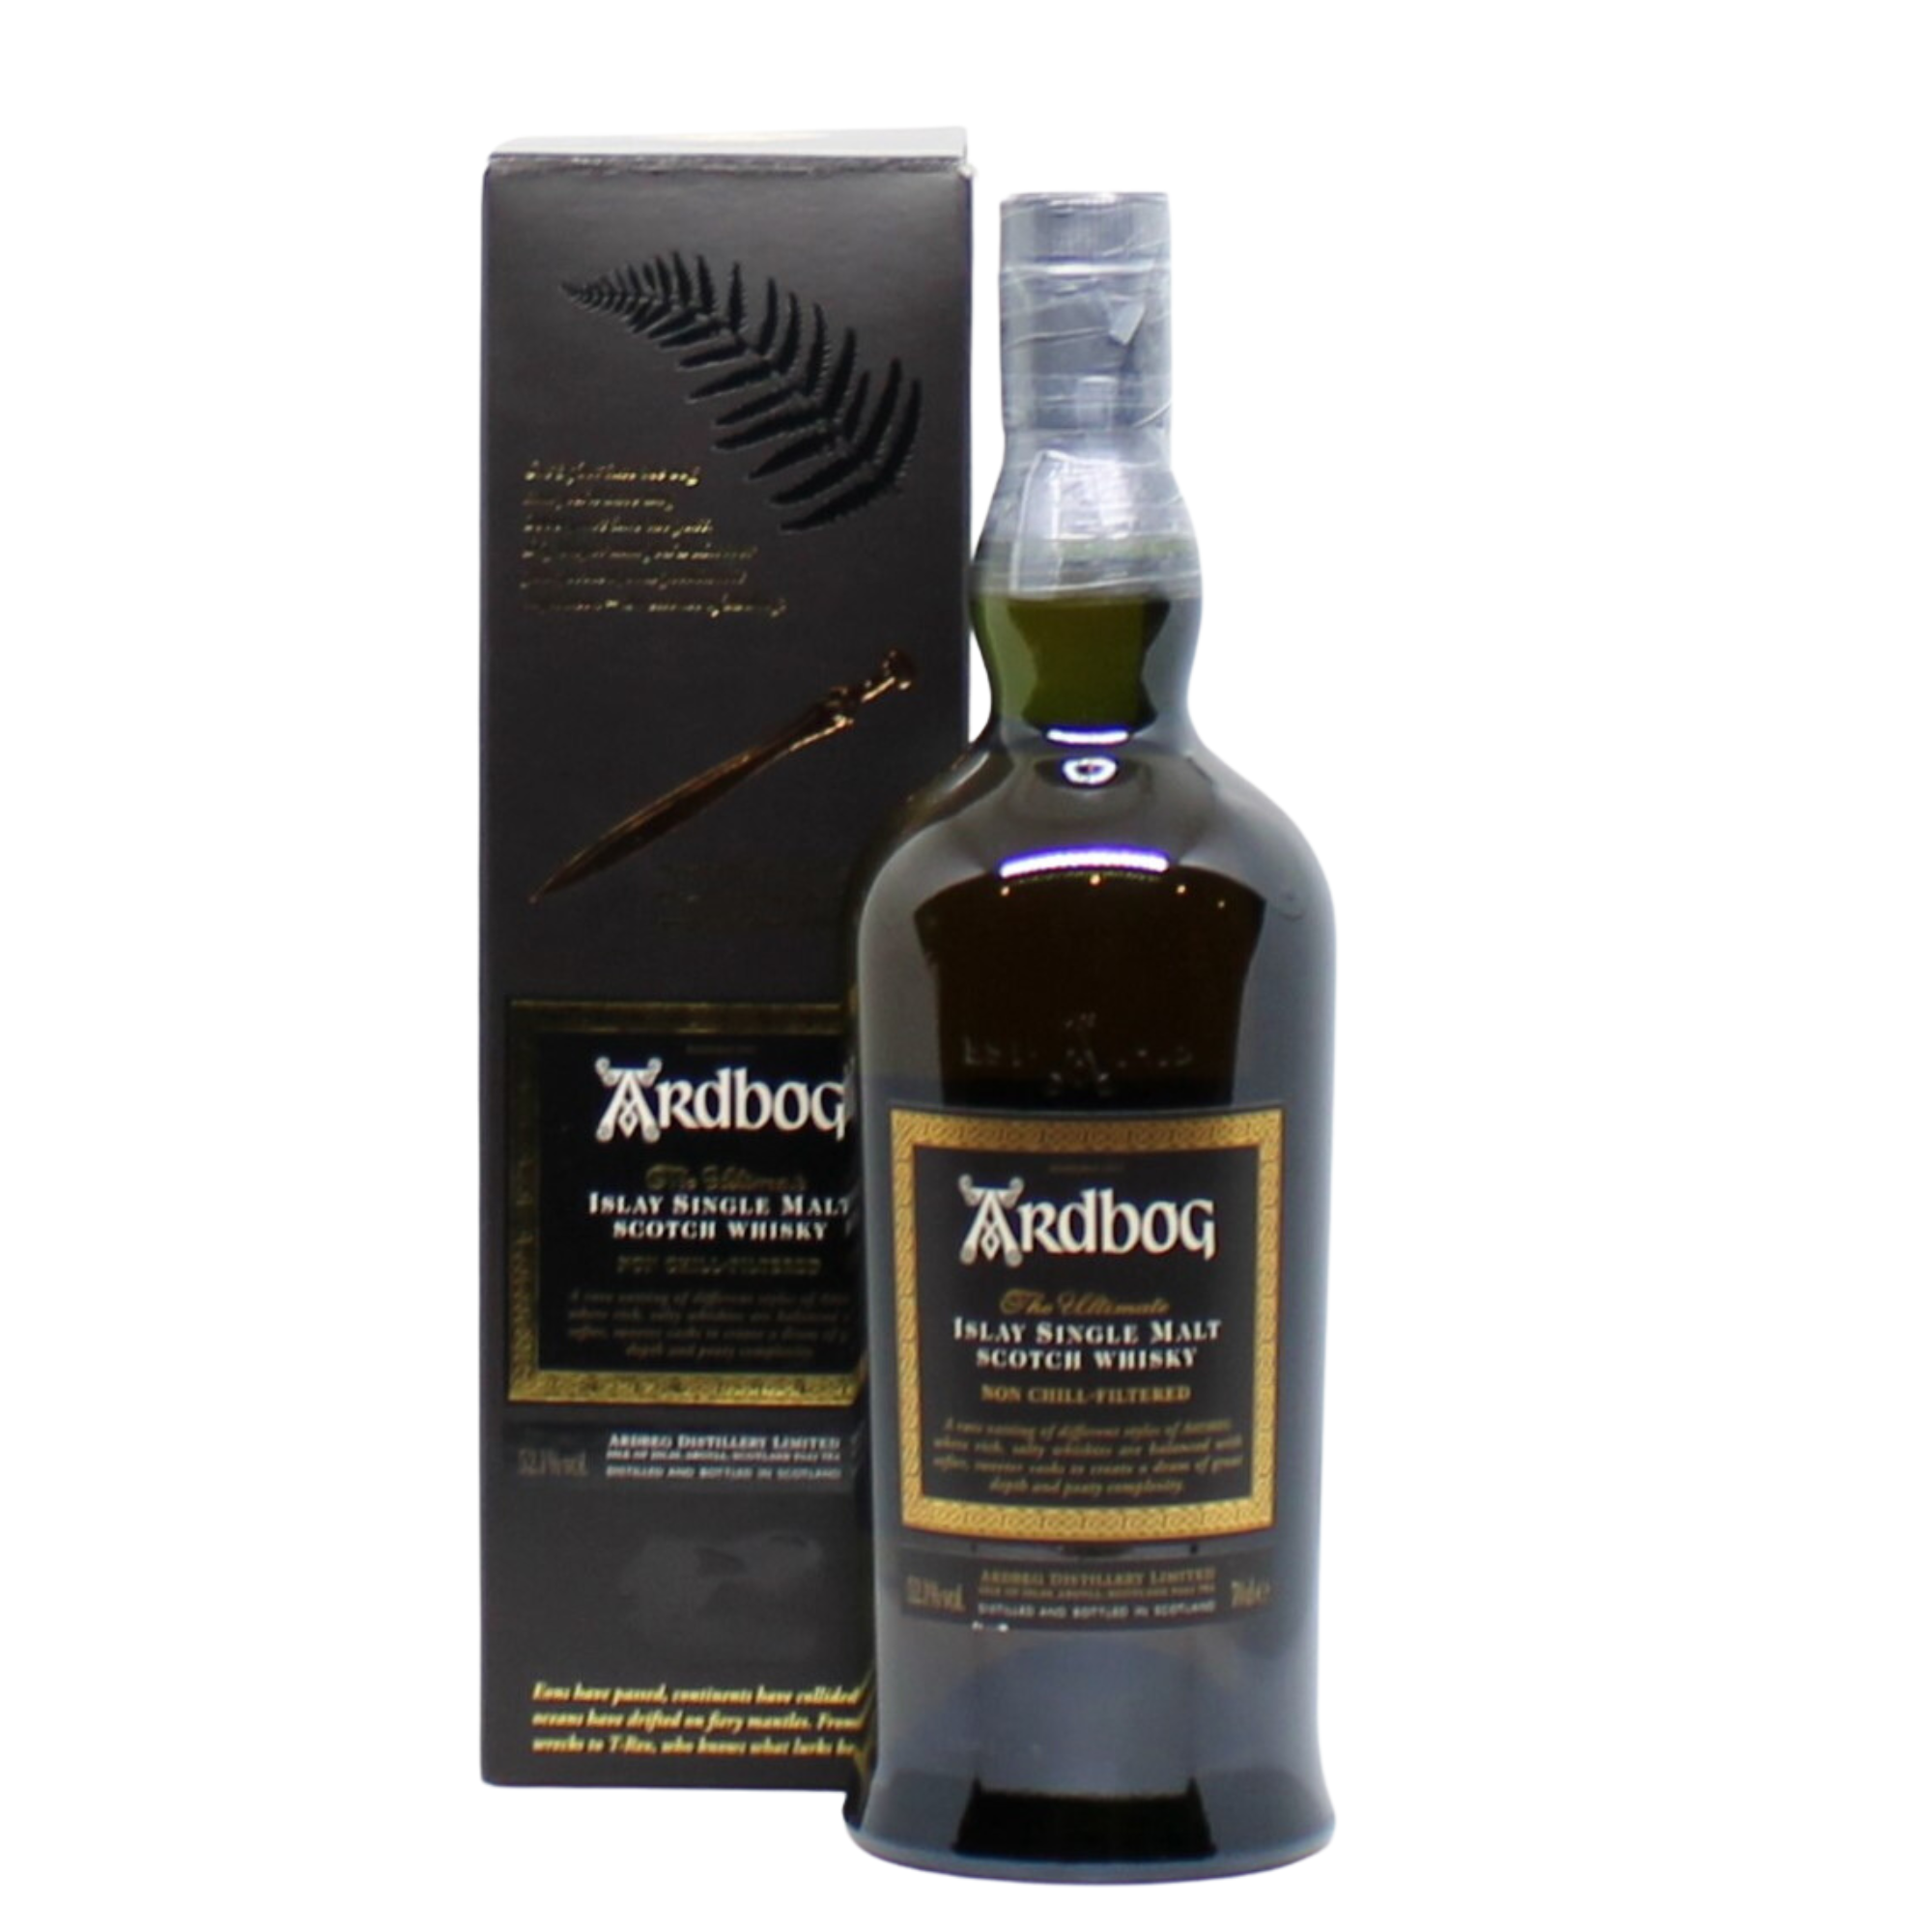 A limited edition Ardbeg released during the 2013 Fèis Ìle whisky festival. Aged in a combination of bourbon as well as some Manzanilla sherry casks, this is reportedly a vatting of 10 Year aged whisky and was produced for the &